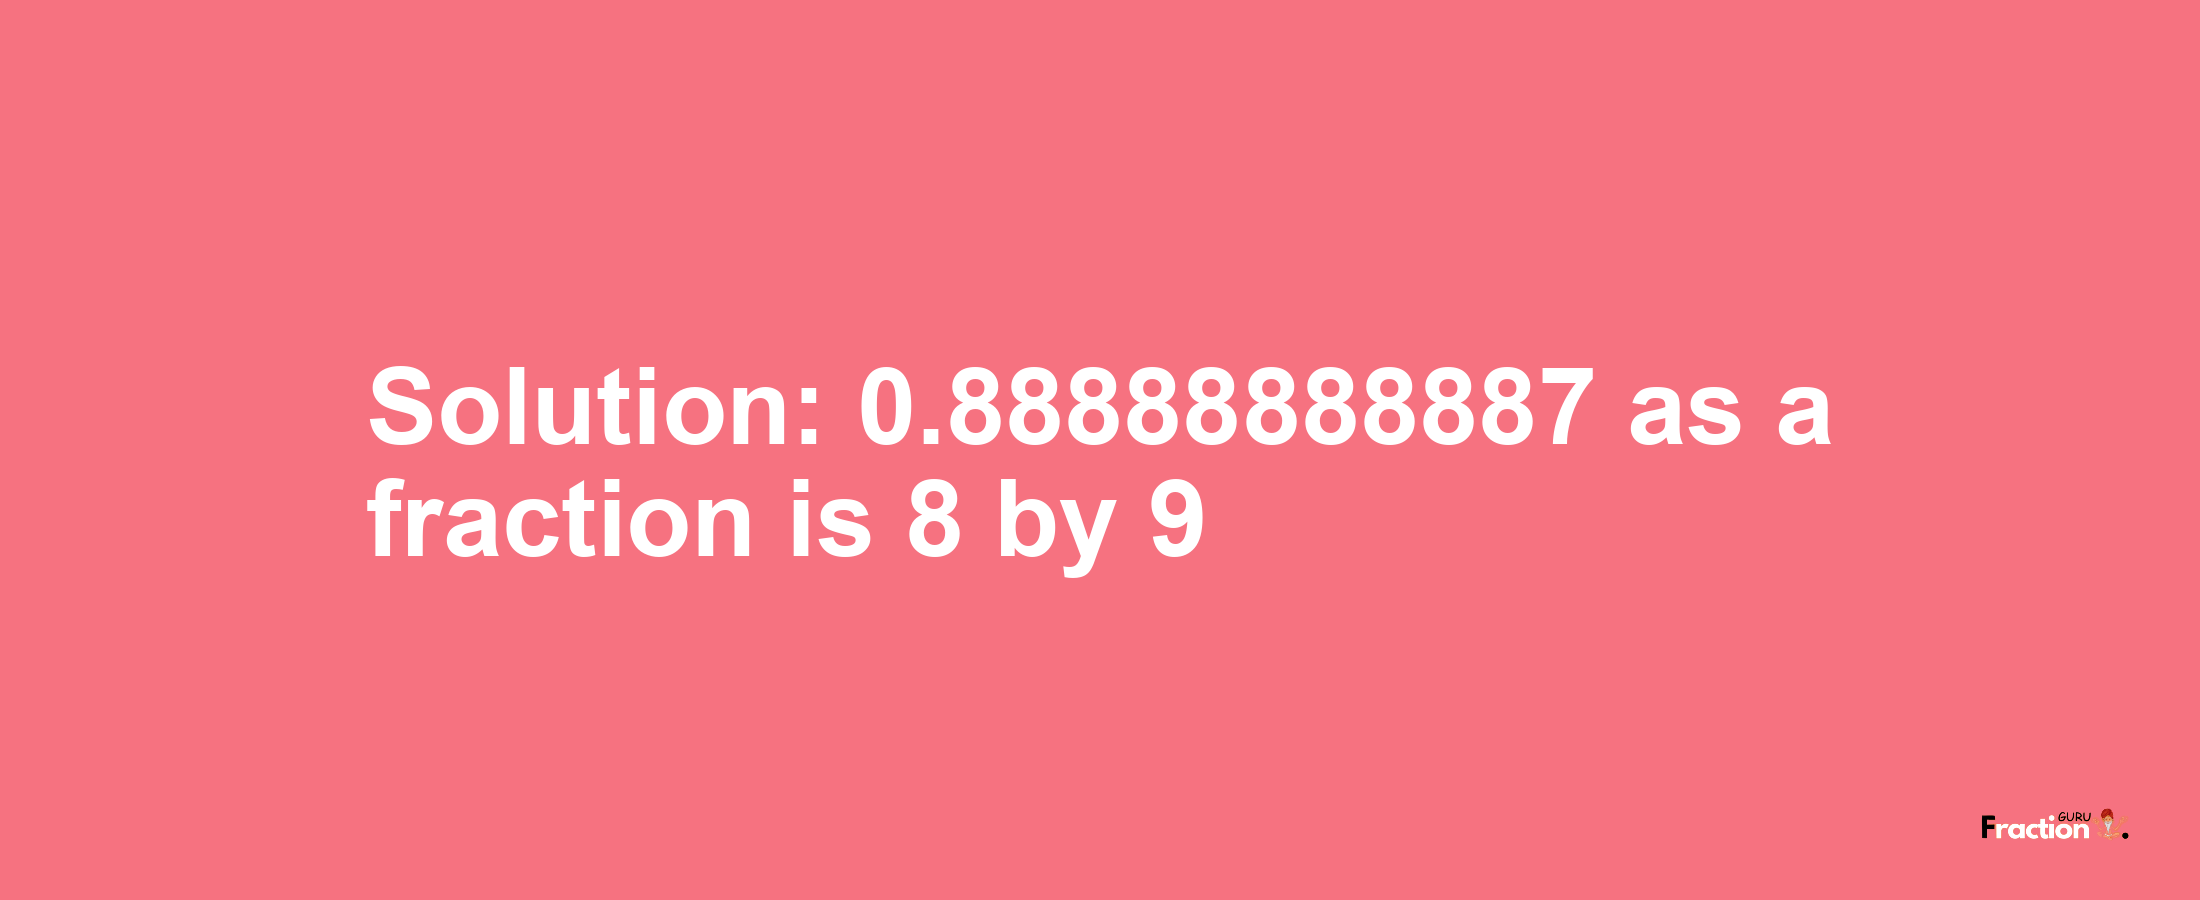 Solution:0.88888888887 as a fraction is 8/9